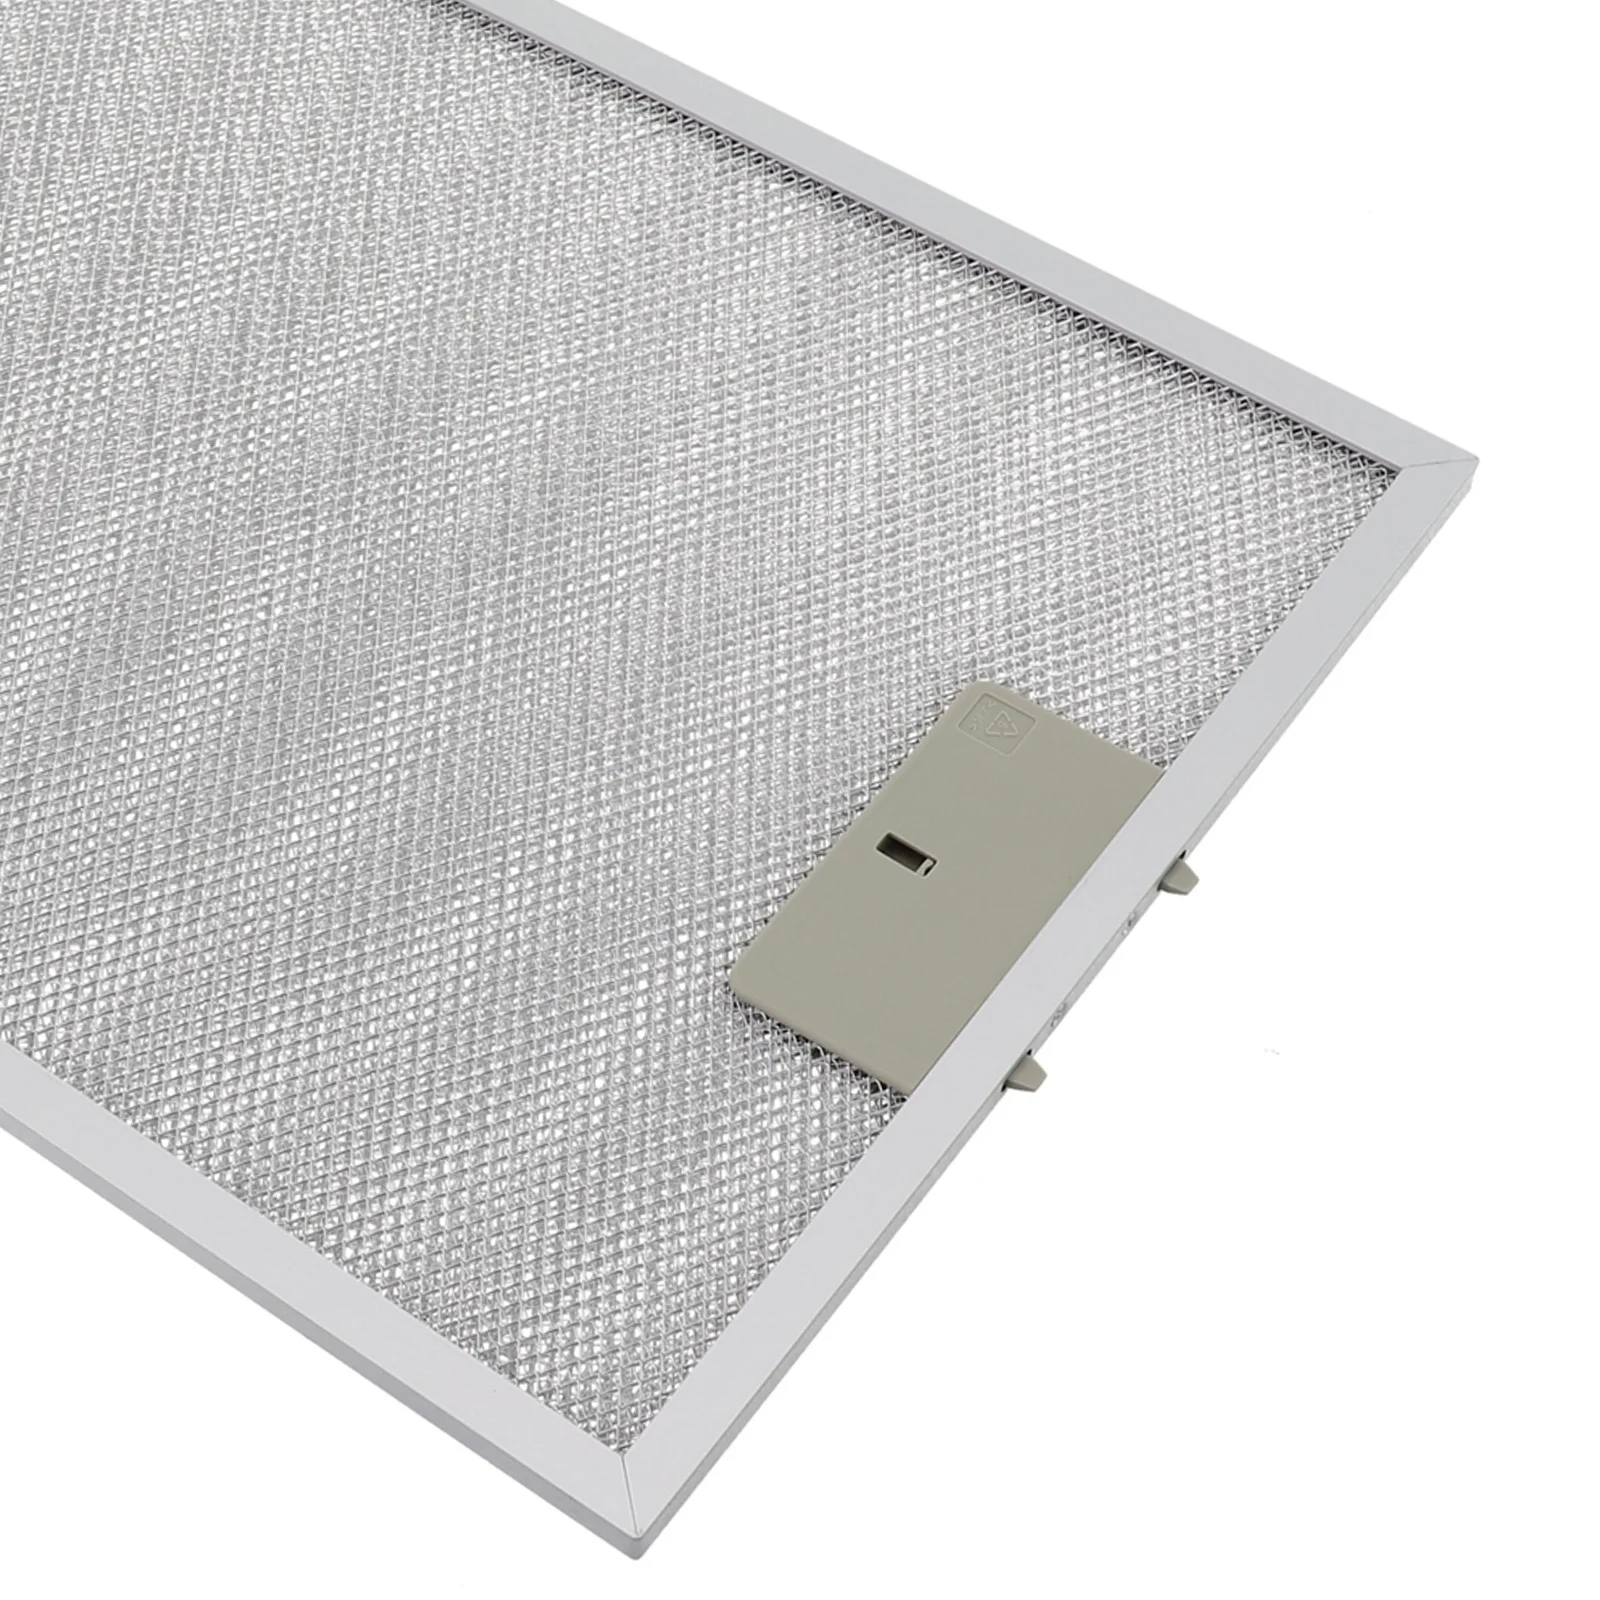 

Oil Baffle Range Hood Filter Stainless Steel 1PCS 340x280x9mm Cleaning Filter Metal Oil Filter Replacement Parts